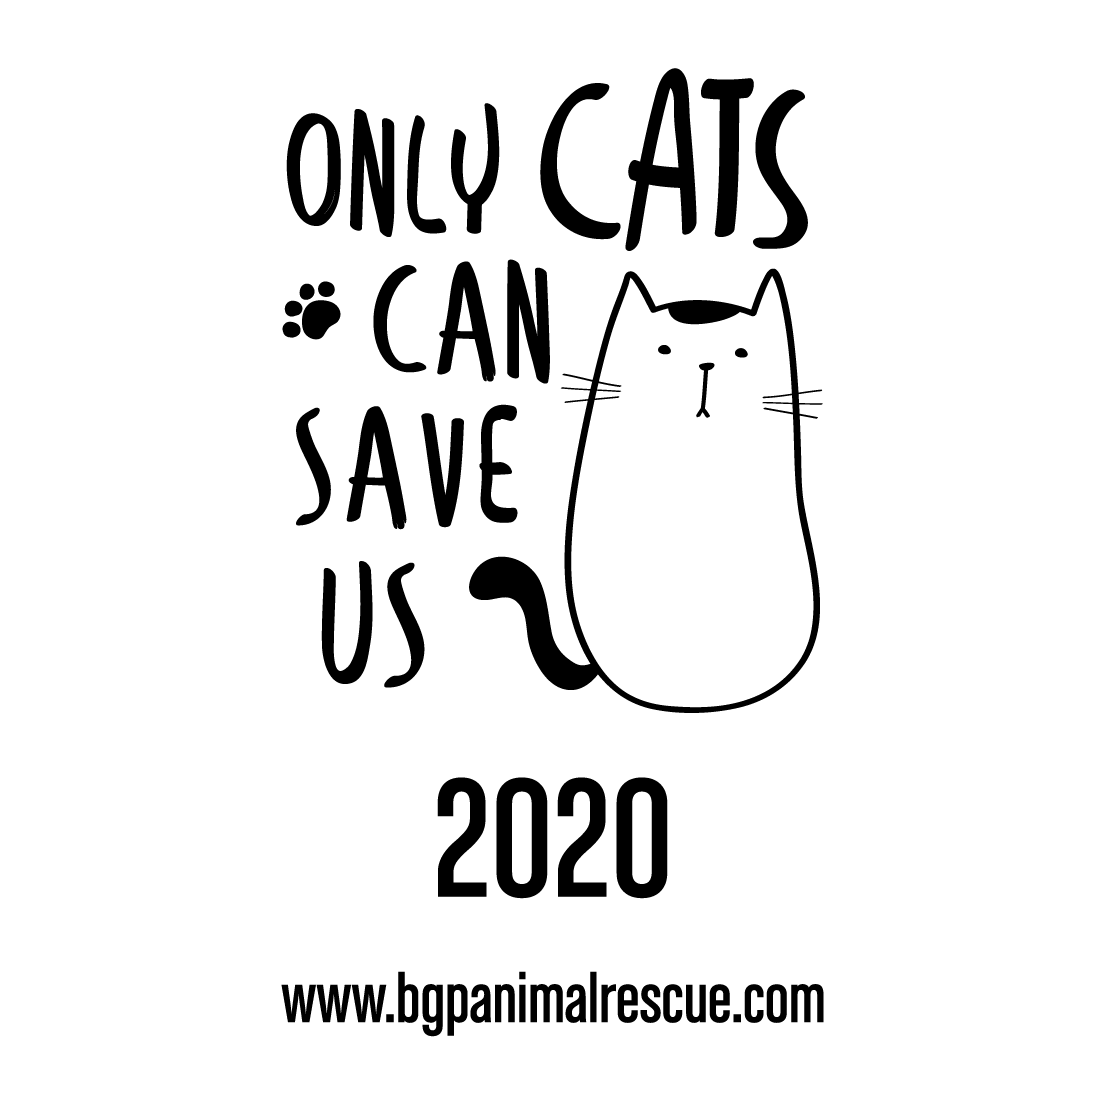 Only Cats can Save 2020 and only YOU can save Cats and Kittens in 2020 and beyond! shirt design - zoomed